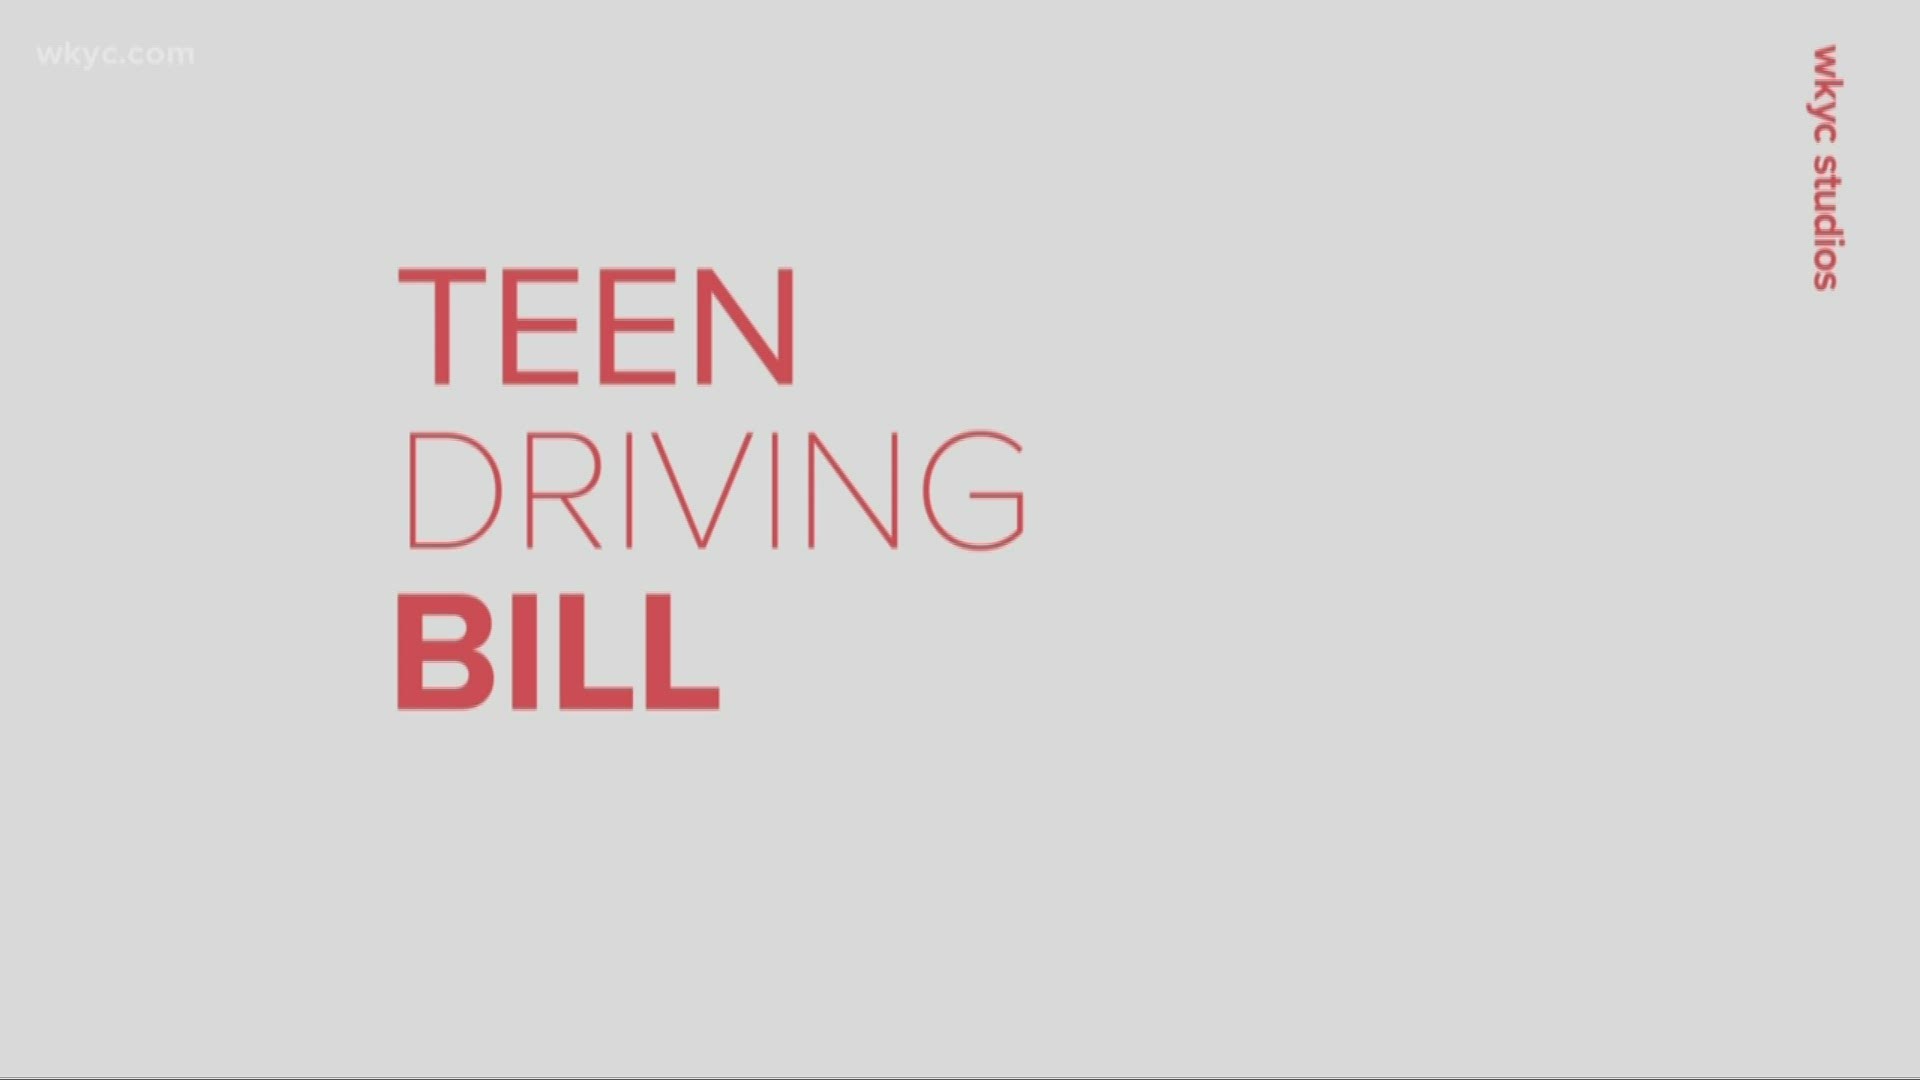 Ohio teenagers hoping to get behind the wheel will have to wait a bit longer under a bill that will undergo a full House vote.